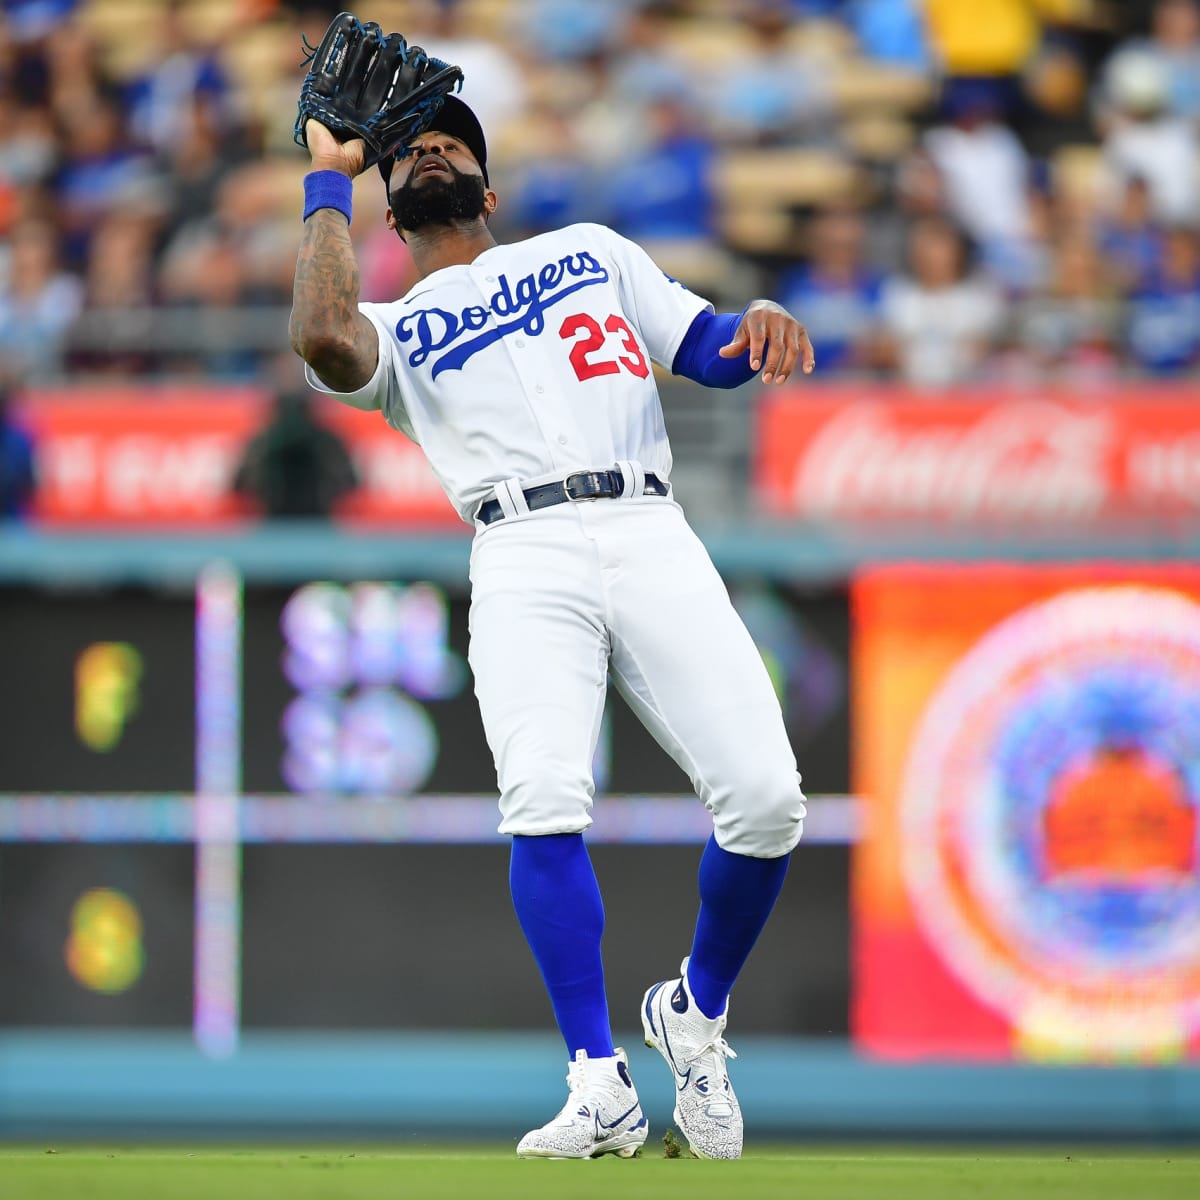 Dodgers News: Jason Heyward Applauds the Younger Players in the